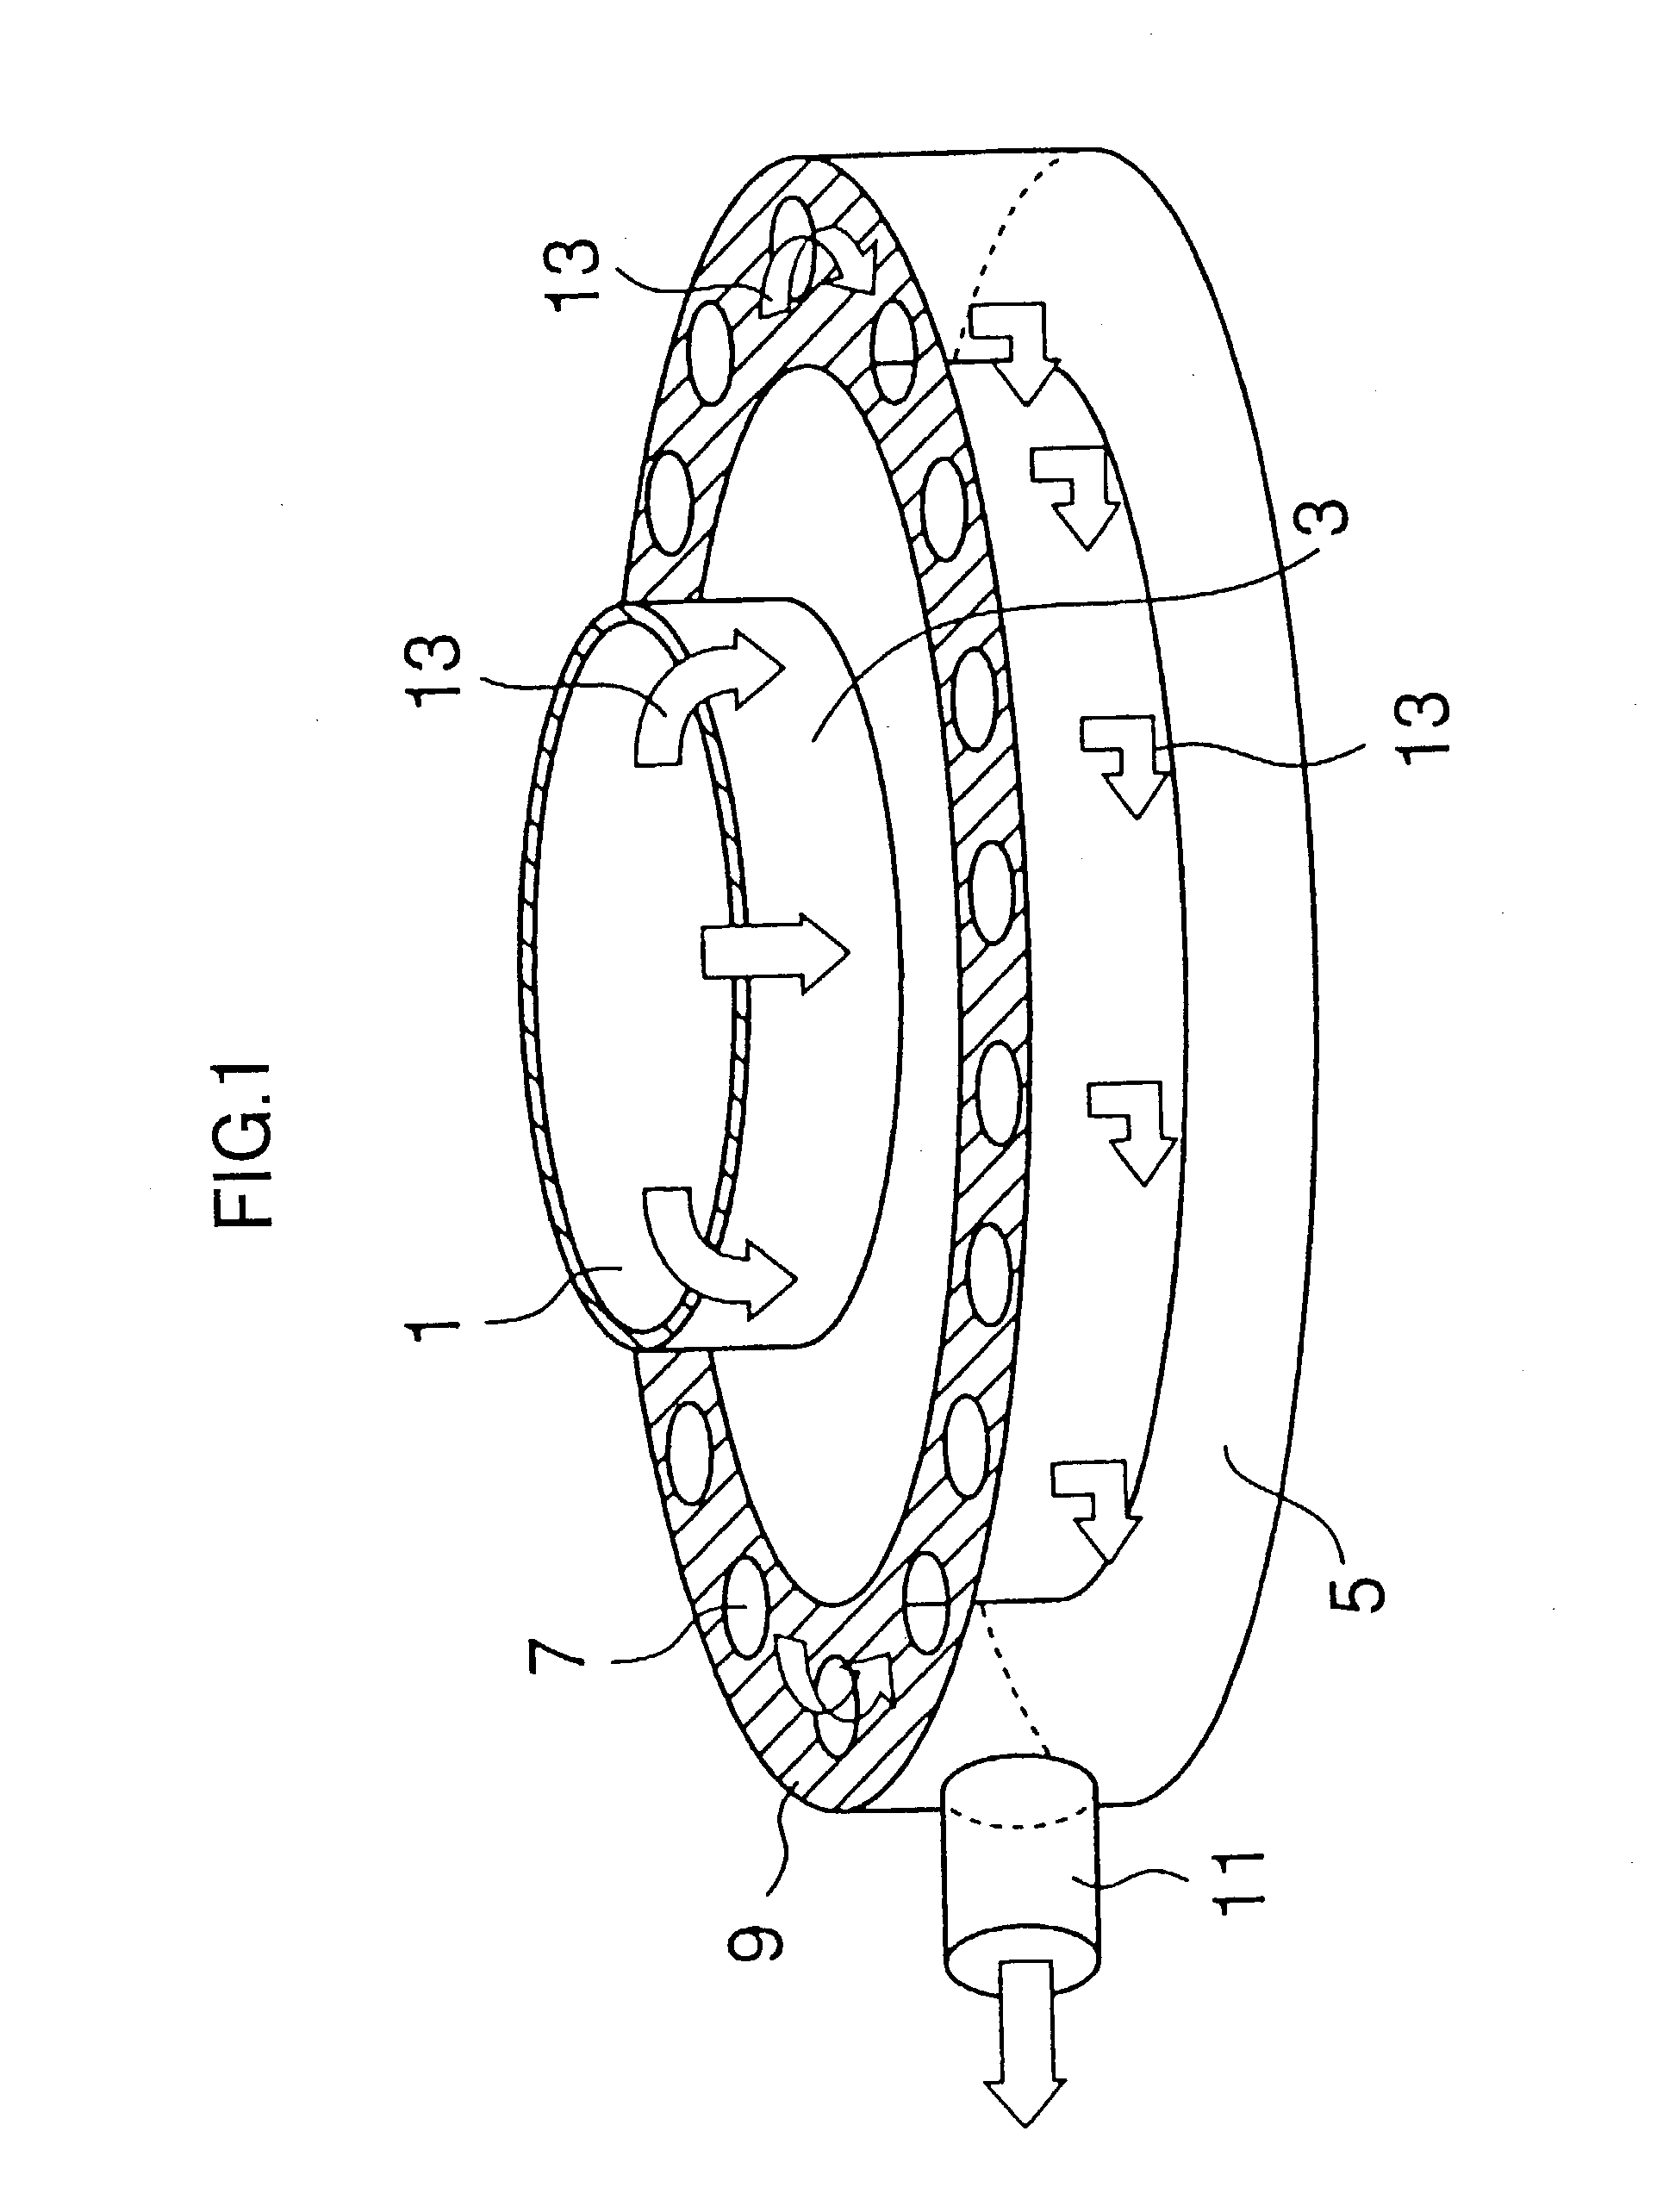 Baffle plate, apparatus for producing the same, method of producing the same, and gas processing apparatus containing baffle plate